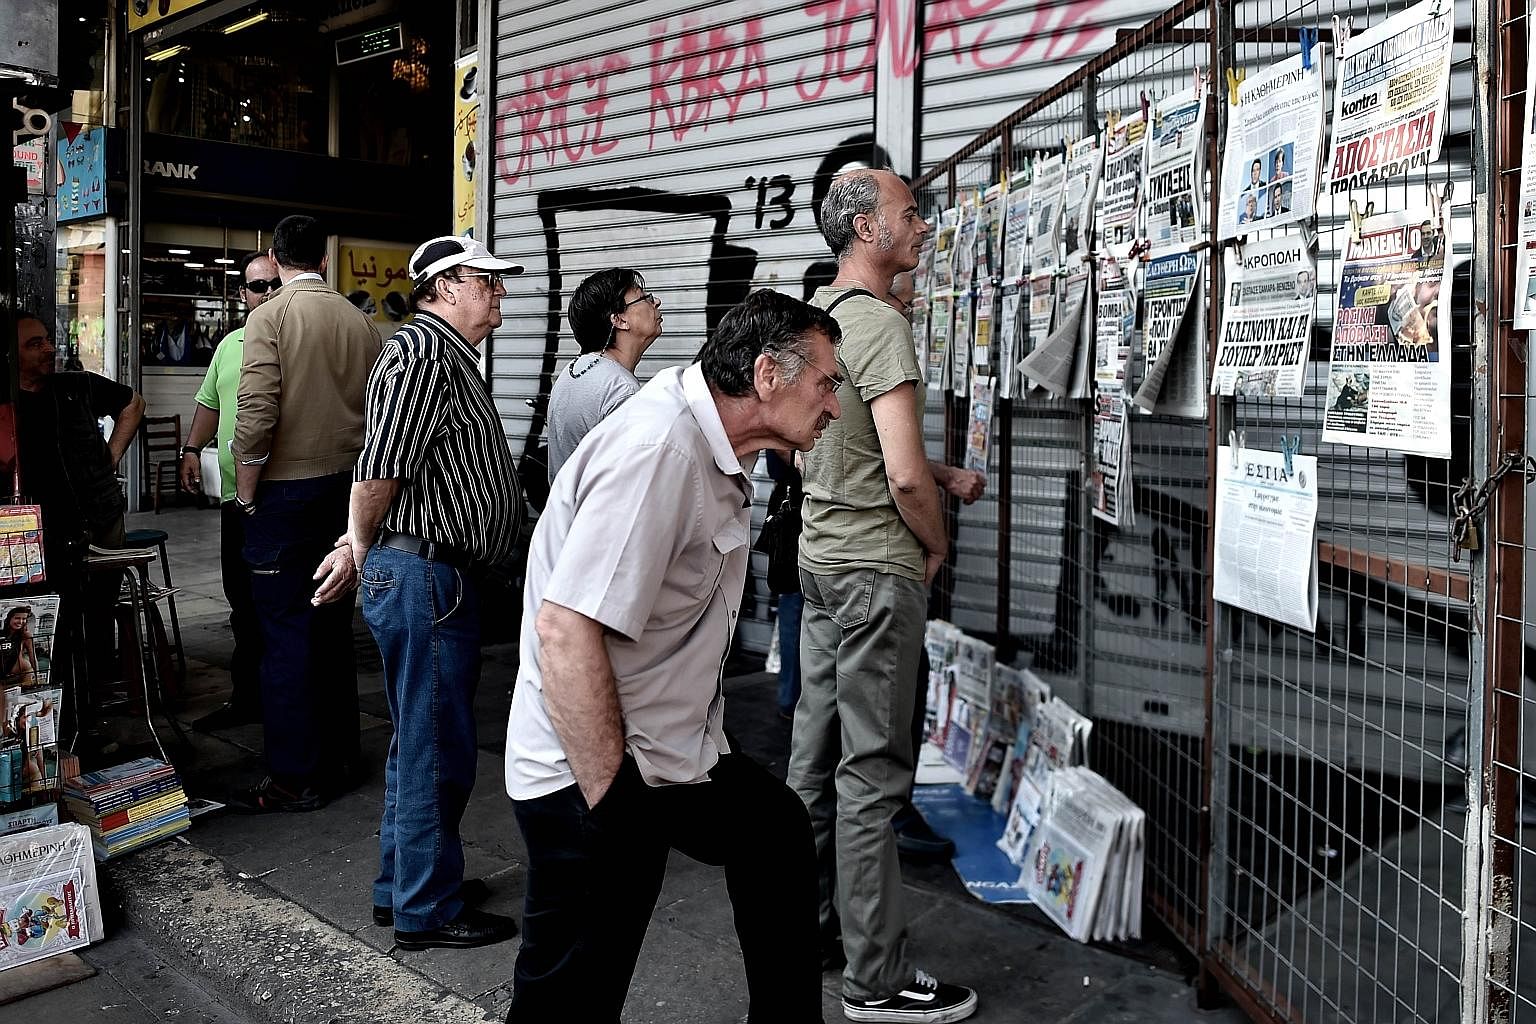 Reactions in Greece to the debt crisis are vastly contrasting. On one of its remote islands, the issue is barely mentioned, unlike in Athens (above), where the discussion never strays far from the crisis.